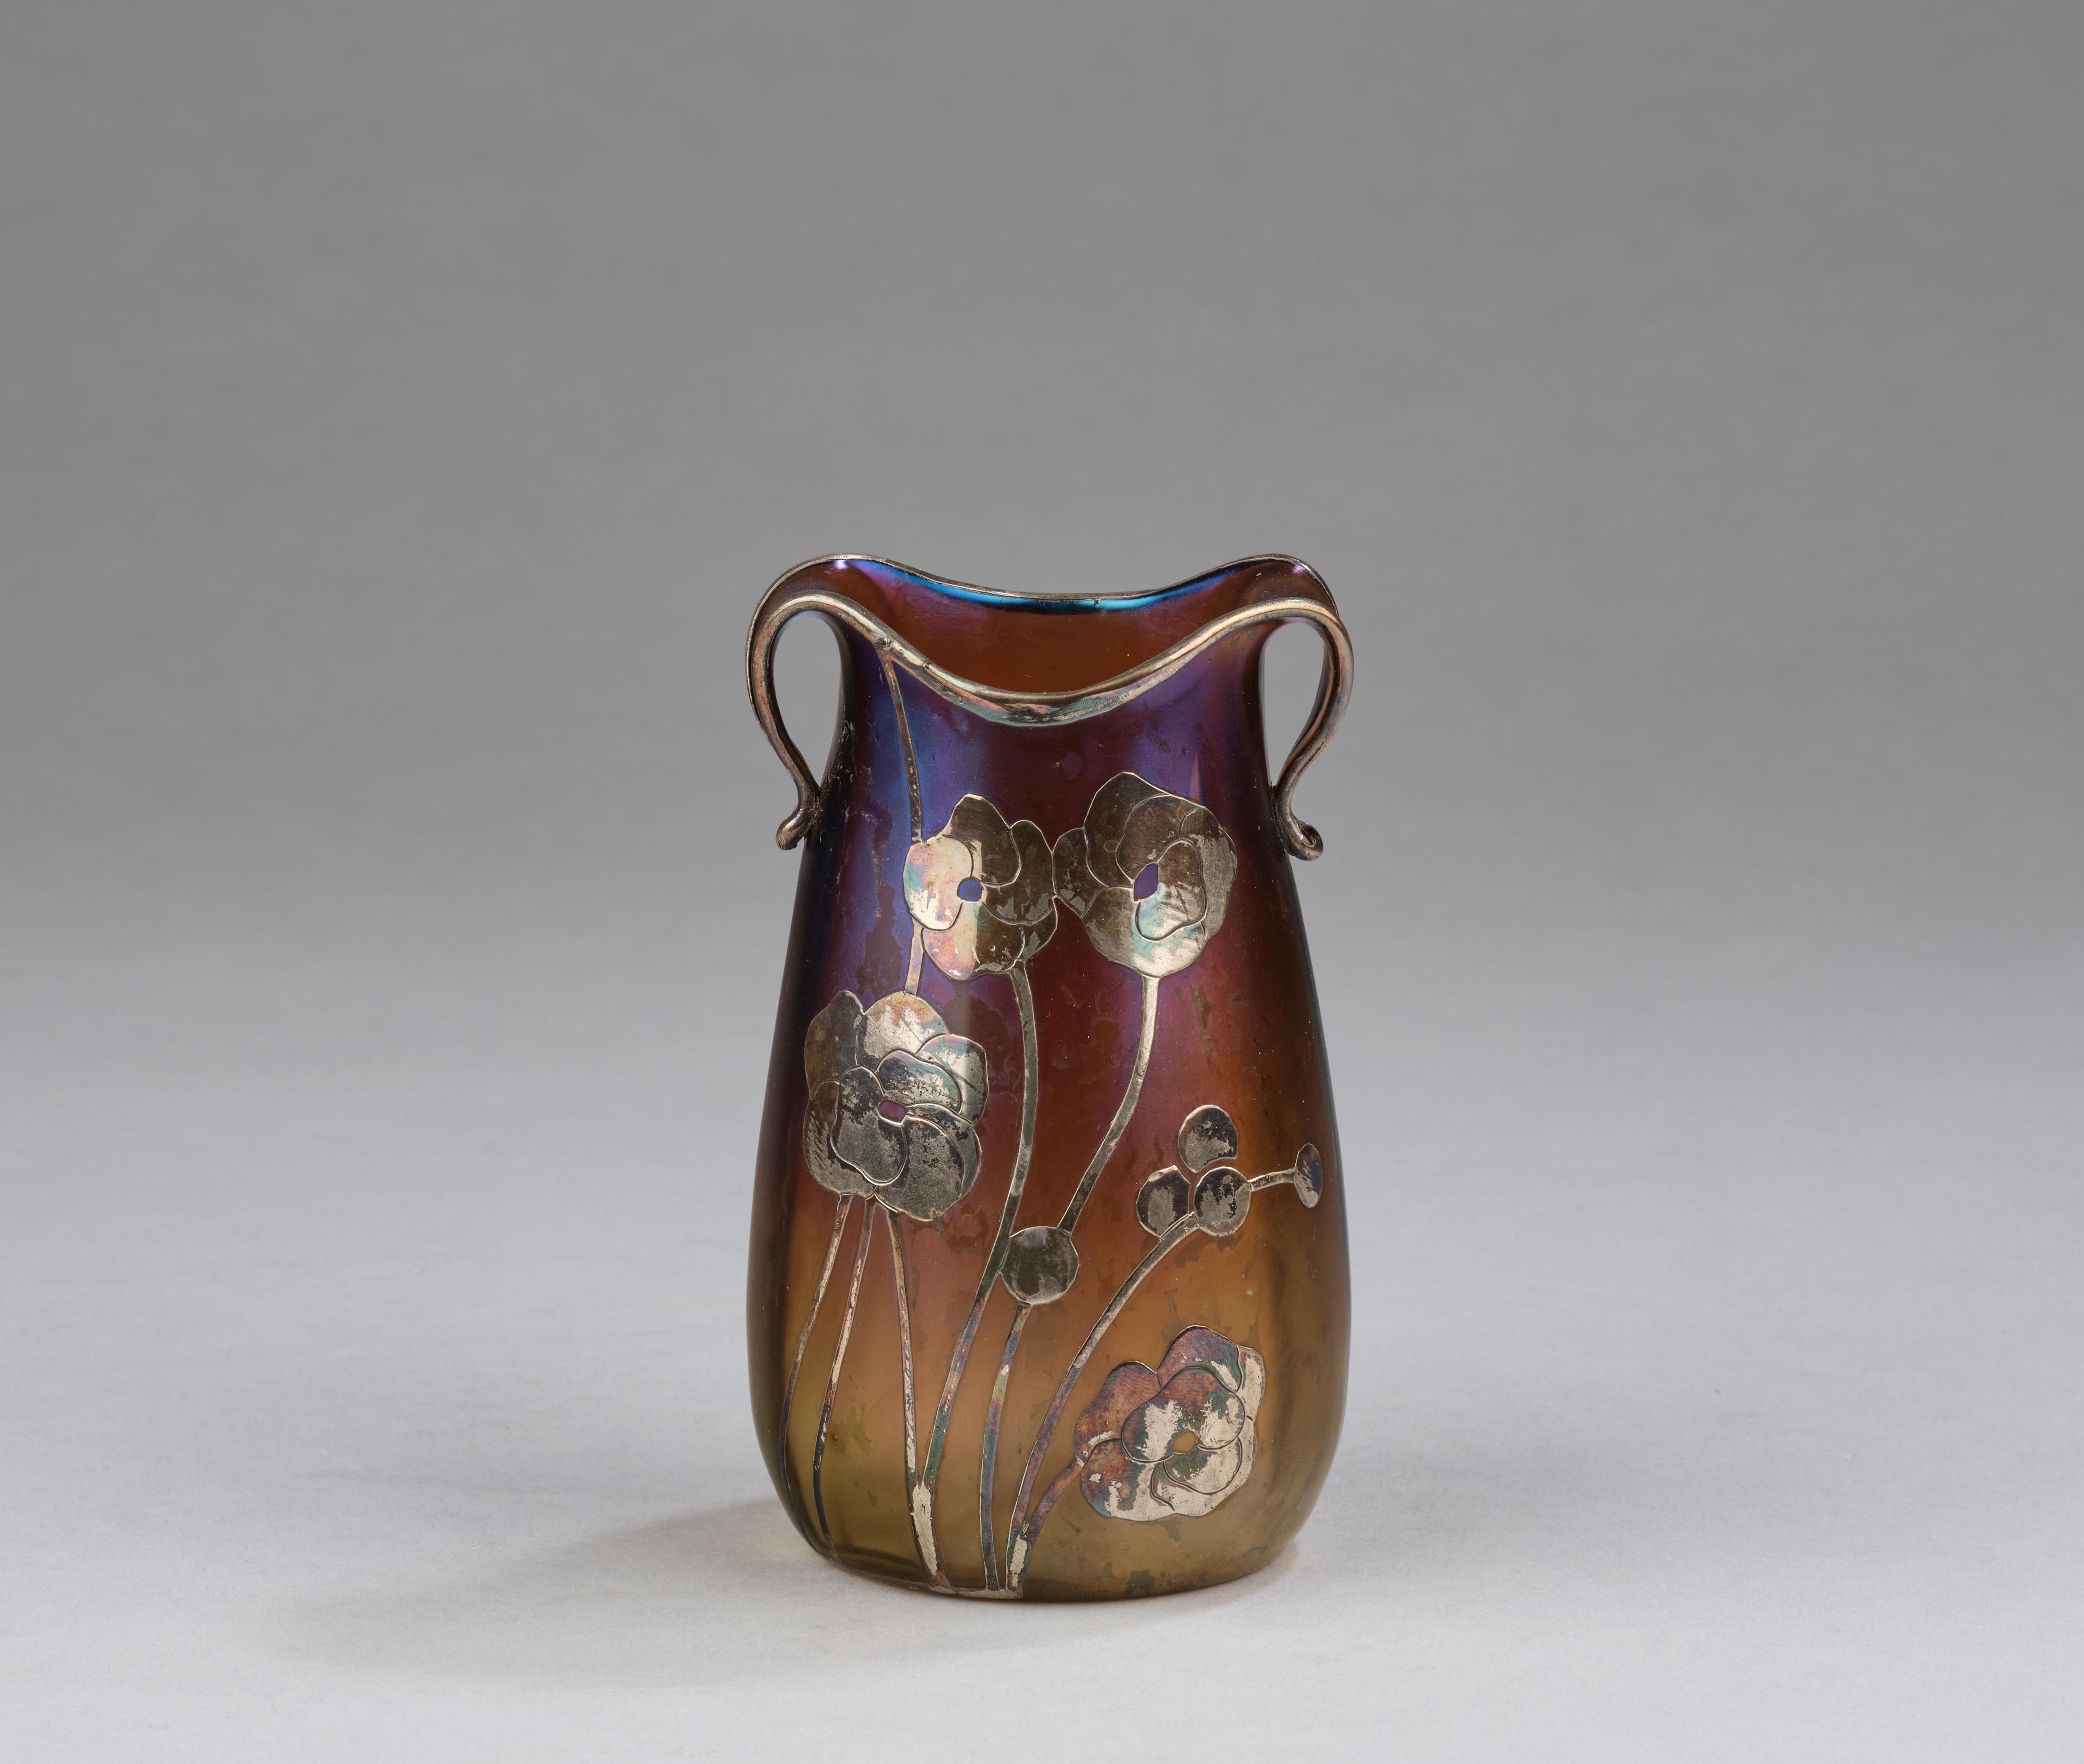 1902 and - Johann E. Jugendstil handled decoration, Dorotheum Realized for 2023/11/03 Century - Arts 1,700 c. galvanoplastic Witwe, Bakalowits, vase and Lötz with Vienna price: Crafts A - EUR Klosermühle, Söhne, 20th